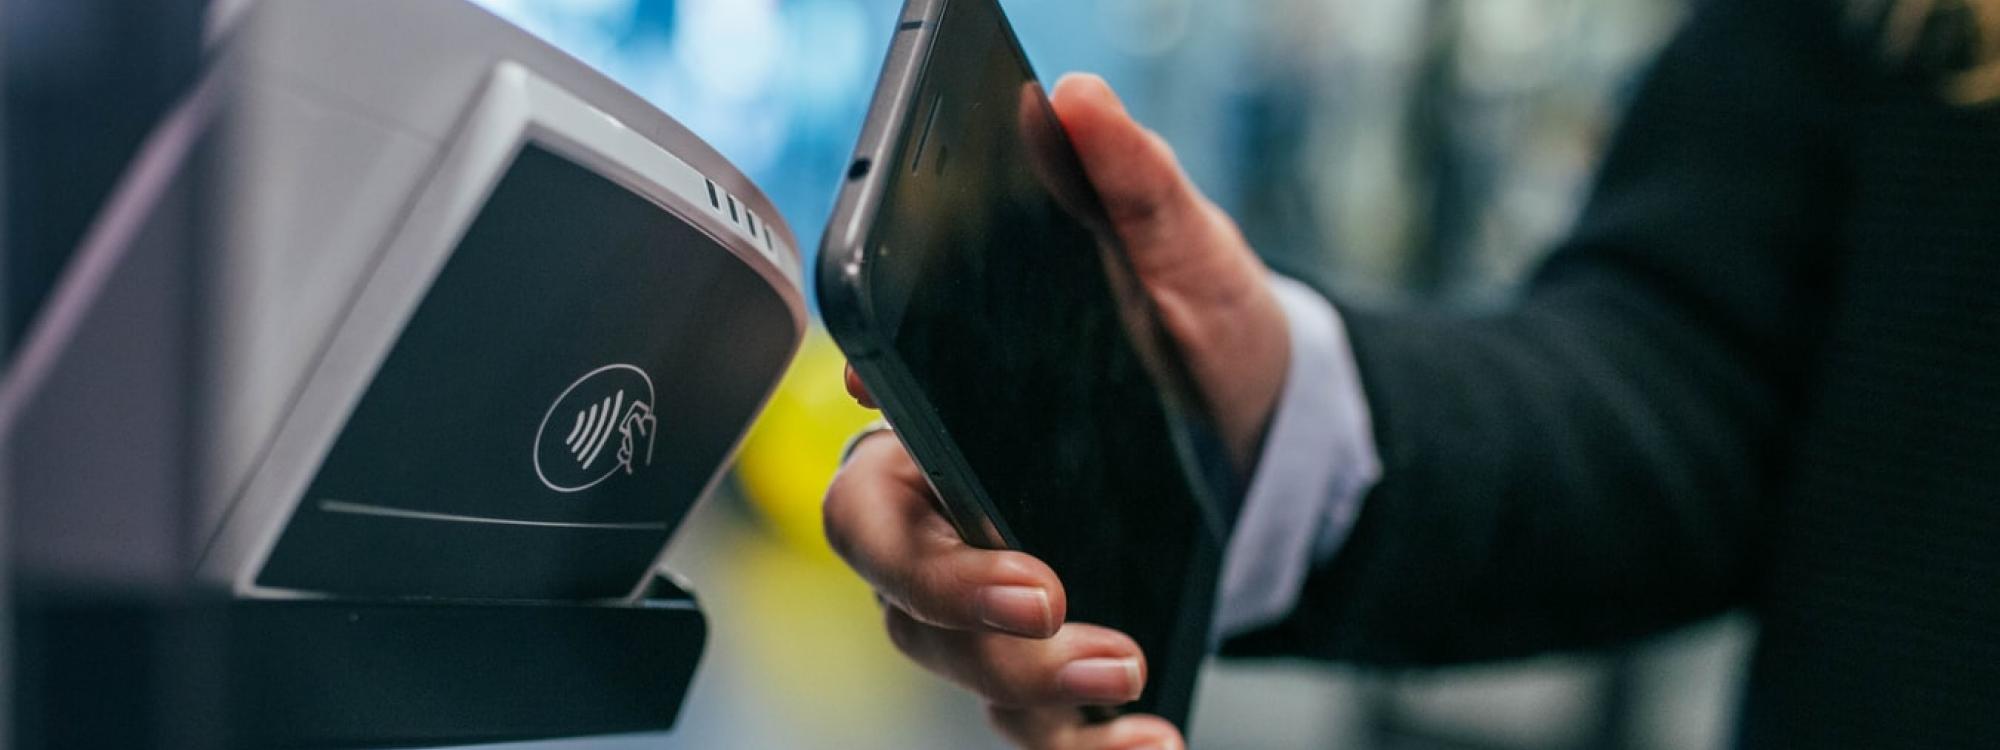 Mobile phone being used for payment at a tap and go machine